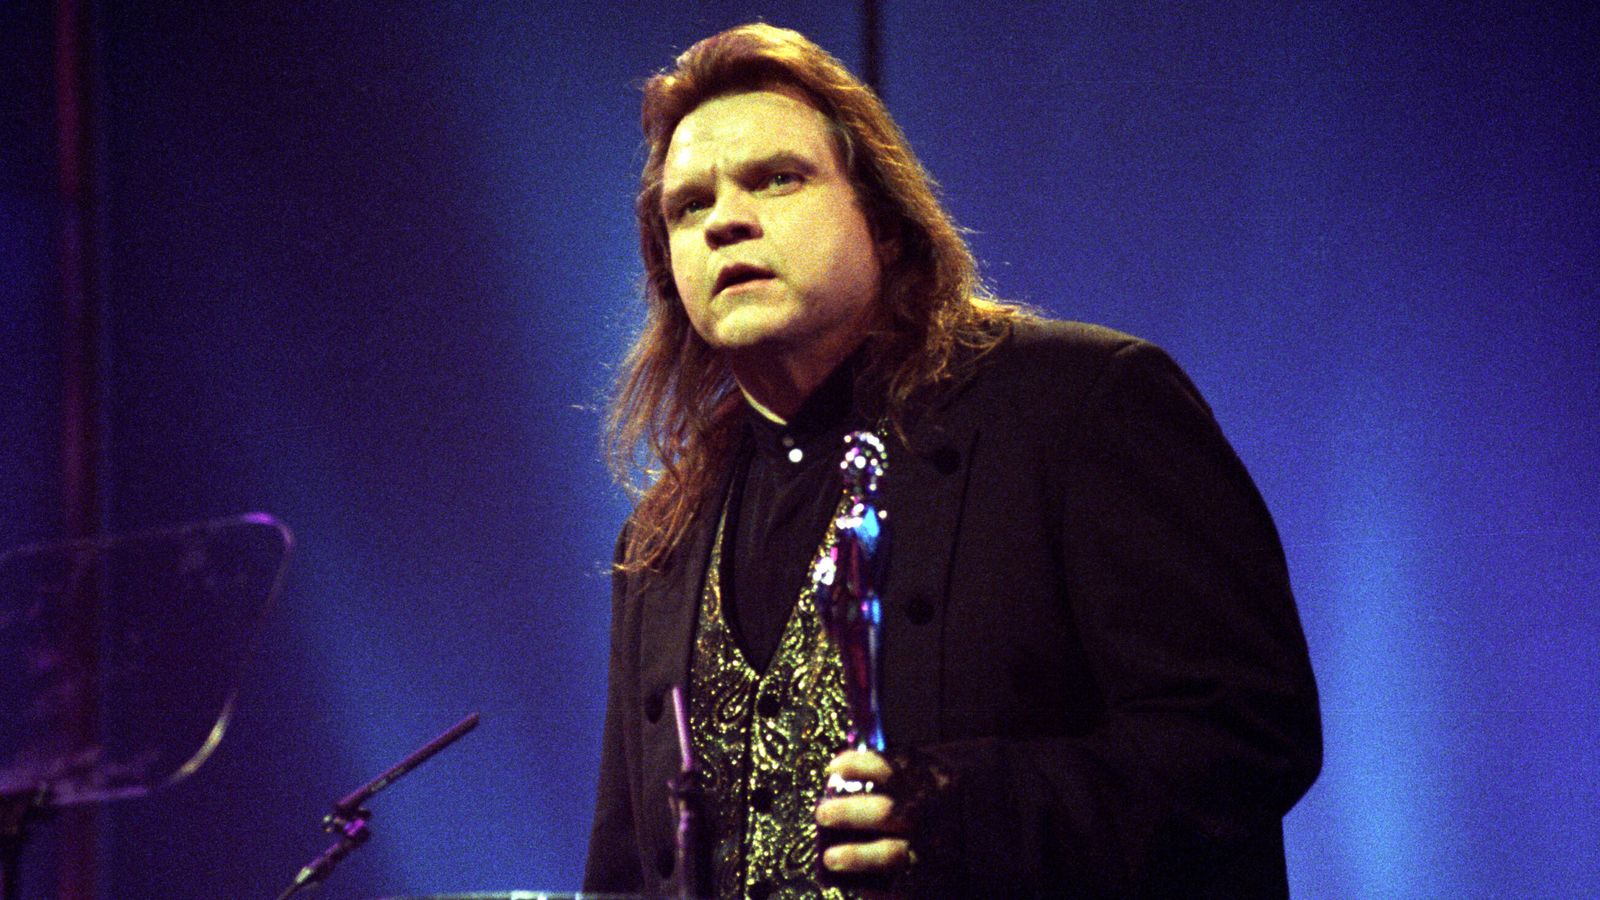 Meat Loaf dies: Bonnie Tyler, Cher and Brian May lead tributes to singer and actor after death aged 74